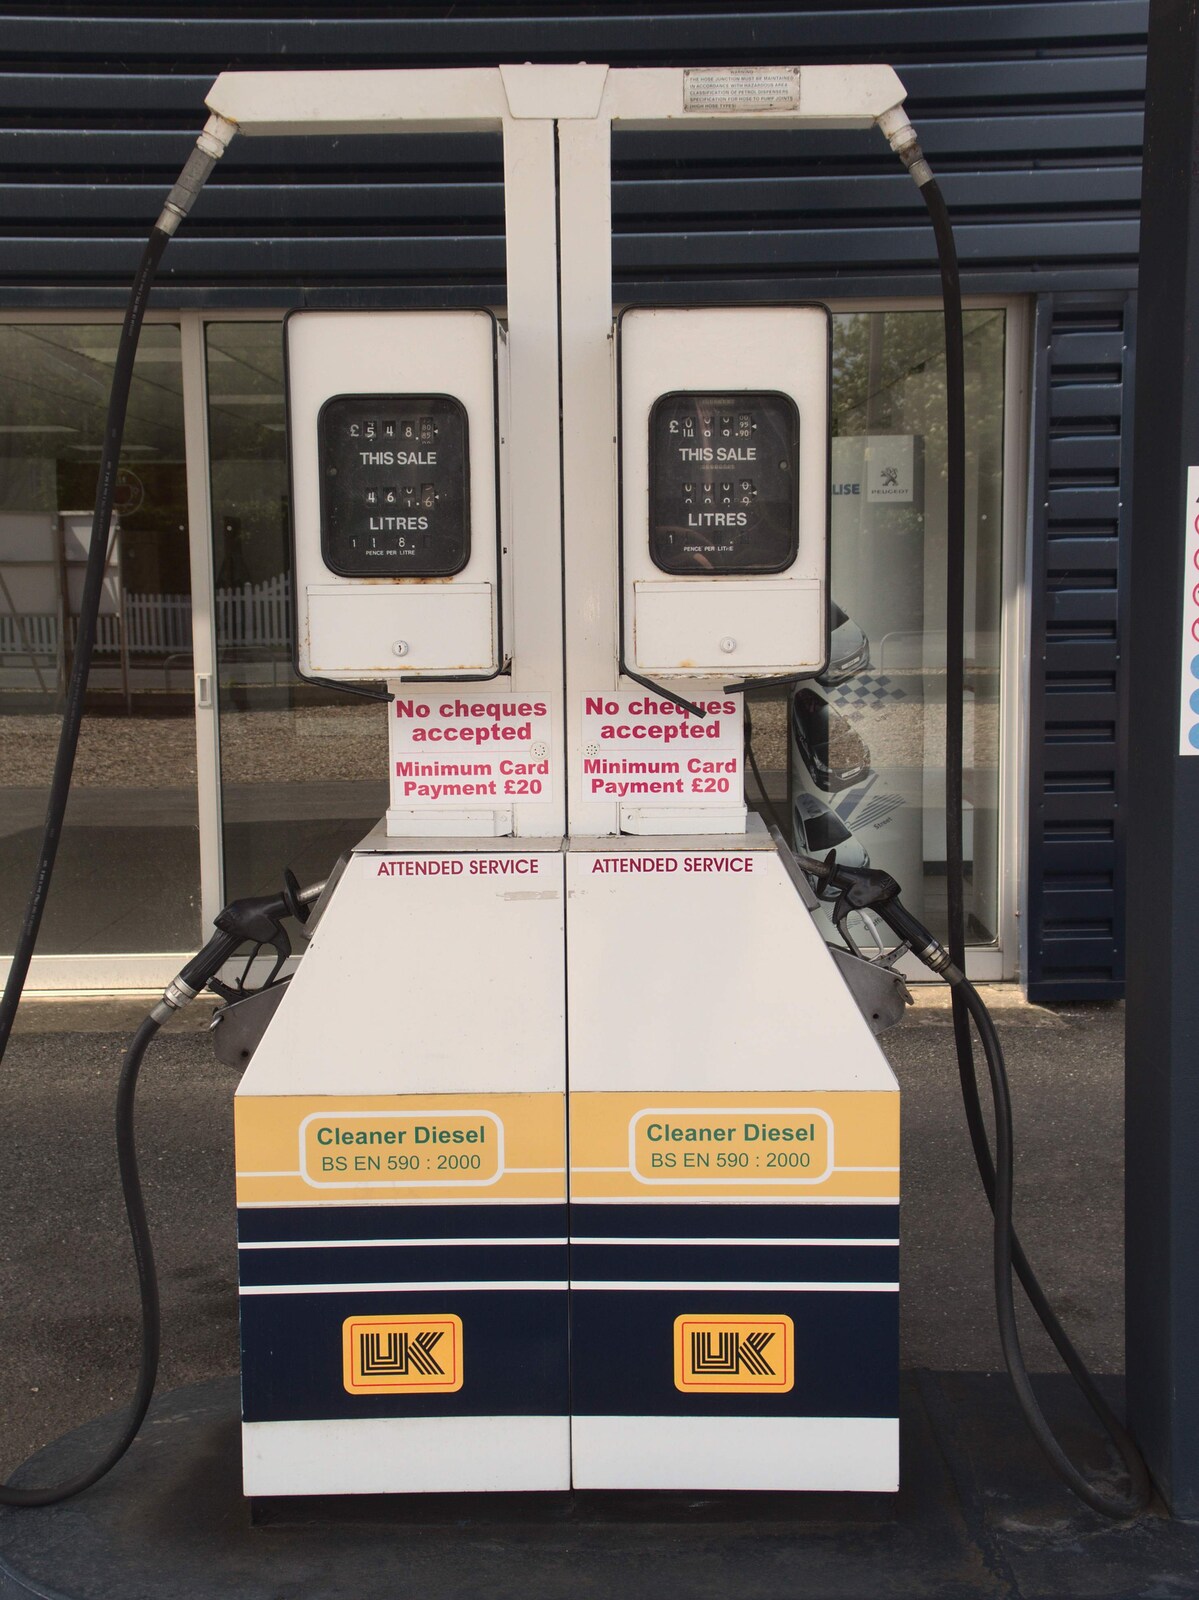 Now-derelict petrol pumps from A Derelict Petrol Station, Palgrave, Suffolk - 16th May 2015